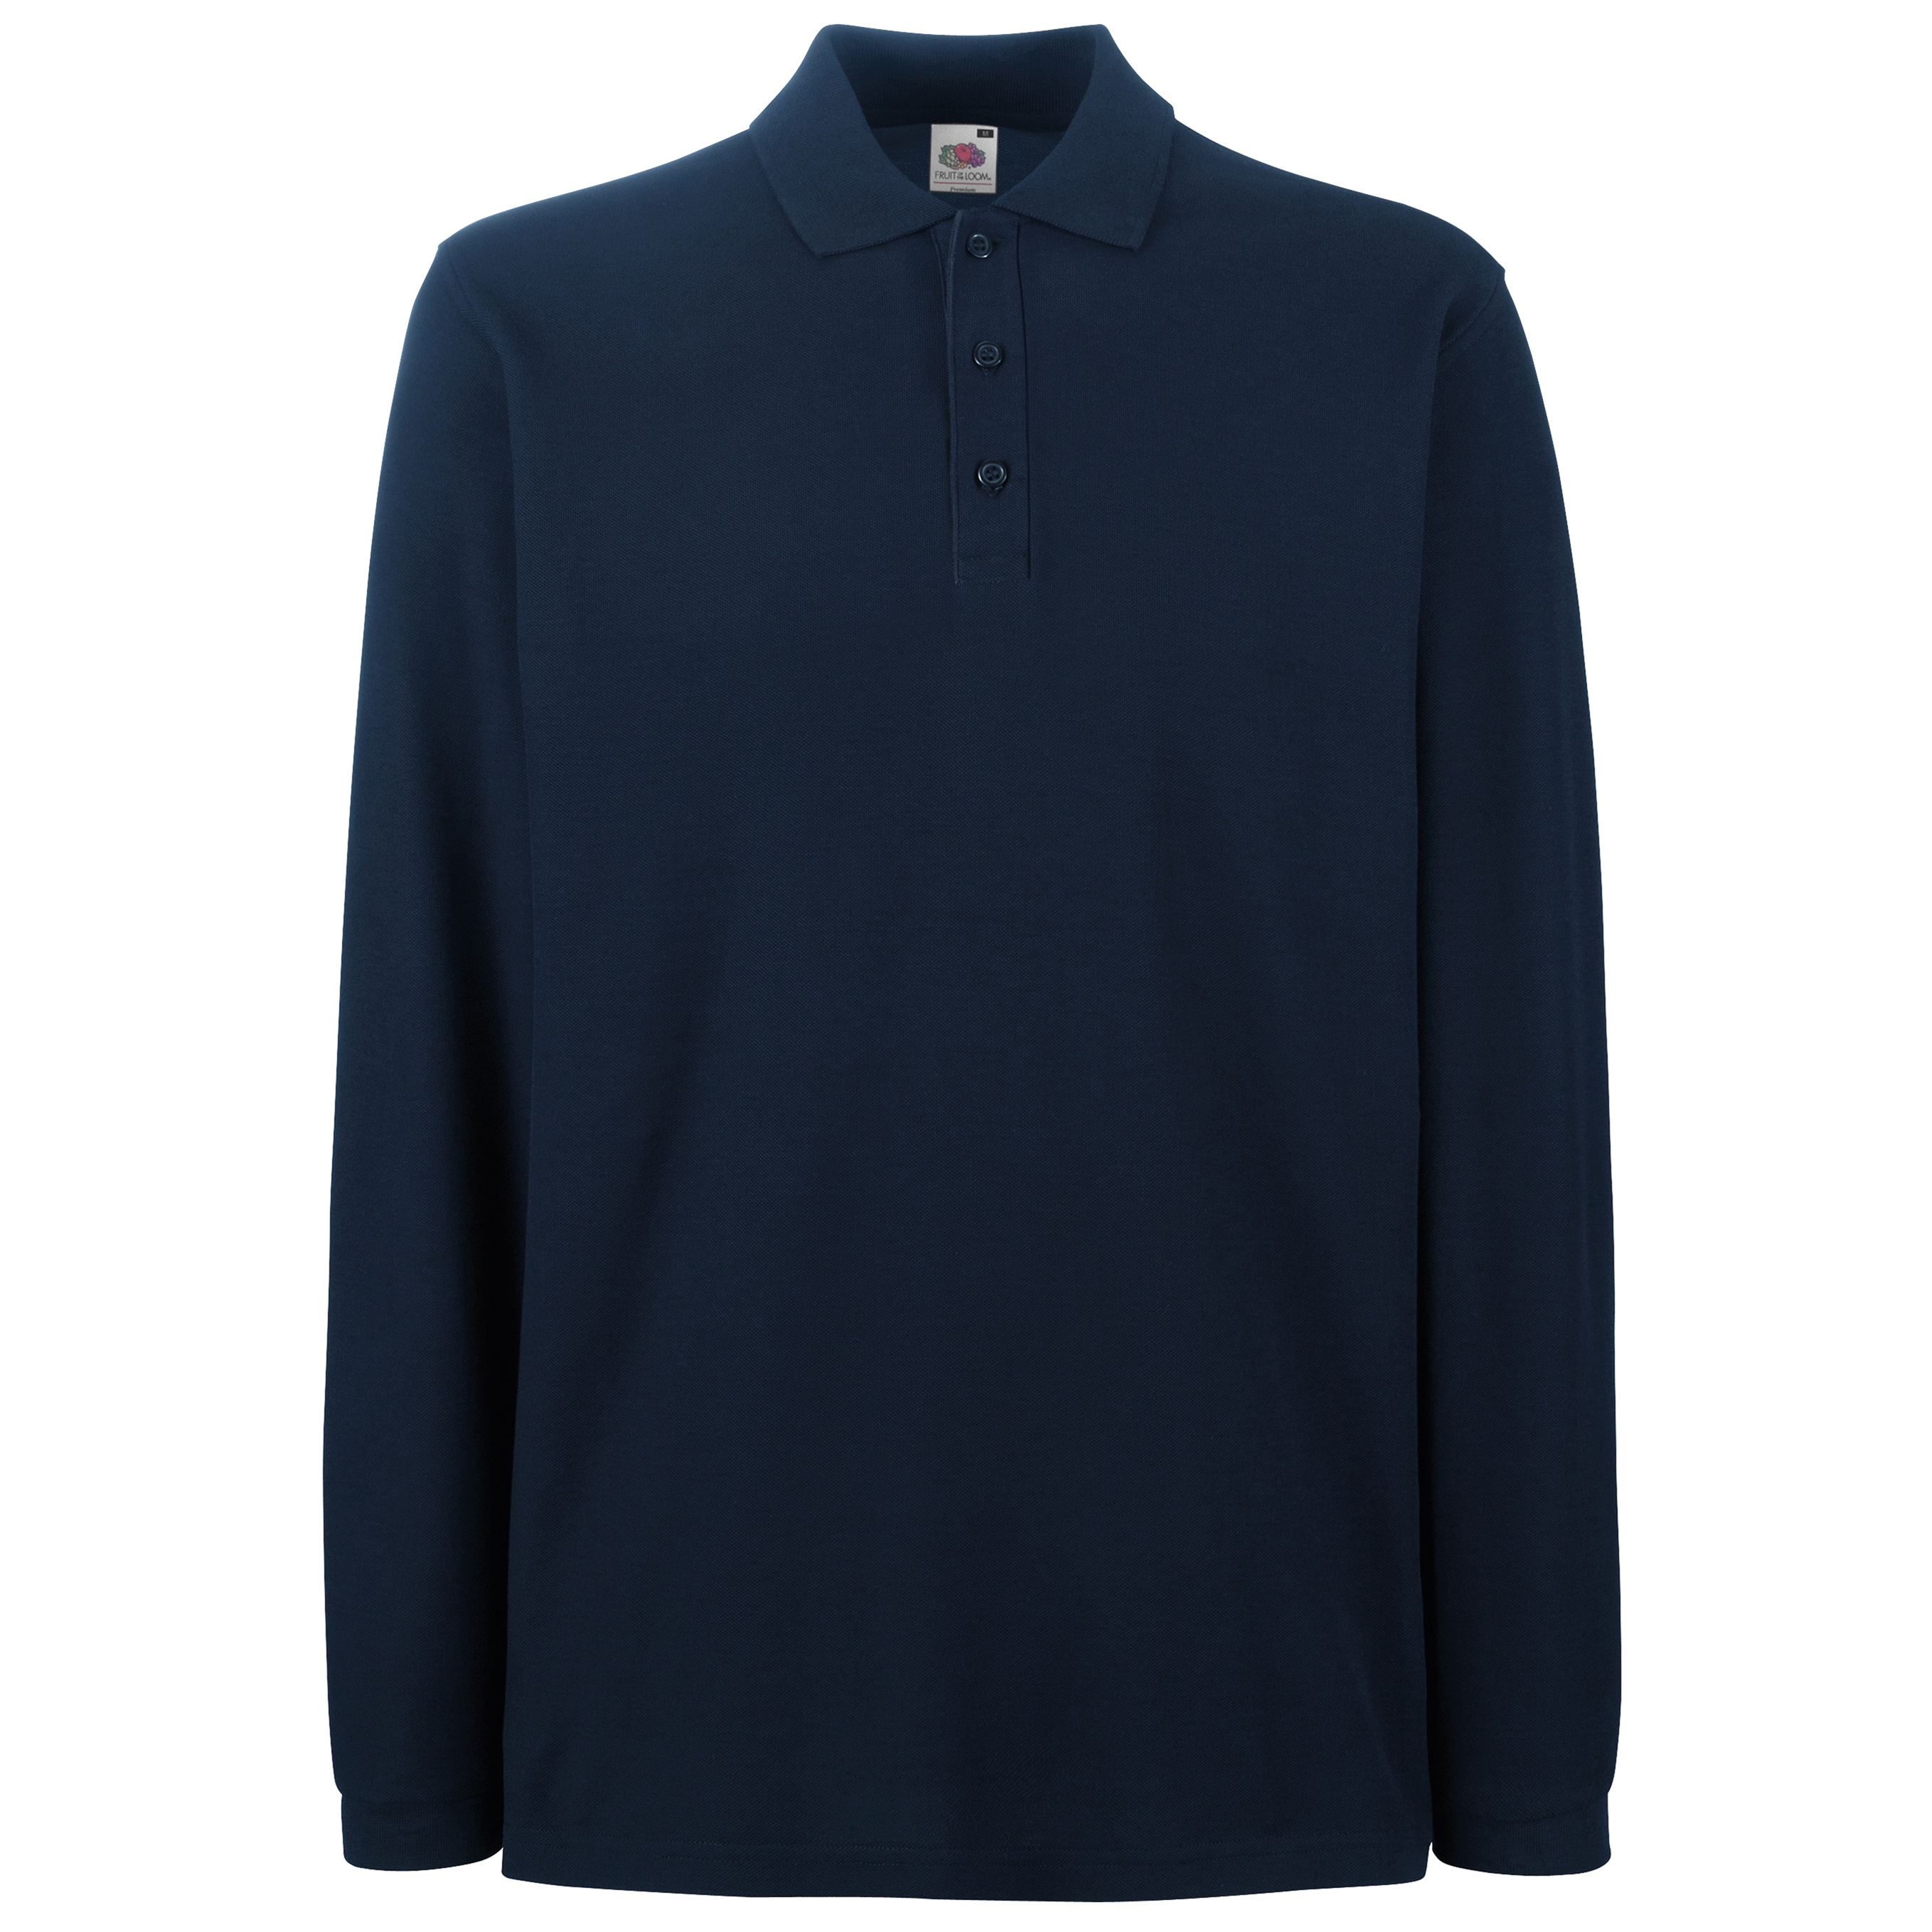 ax-httpswebsystems.s3.amazonaws.comtmp_for_downloadfruit-of-the-loom-long-sleeve-polo-deep-navy.jpg